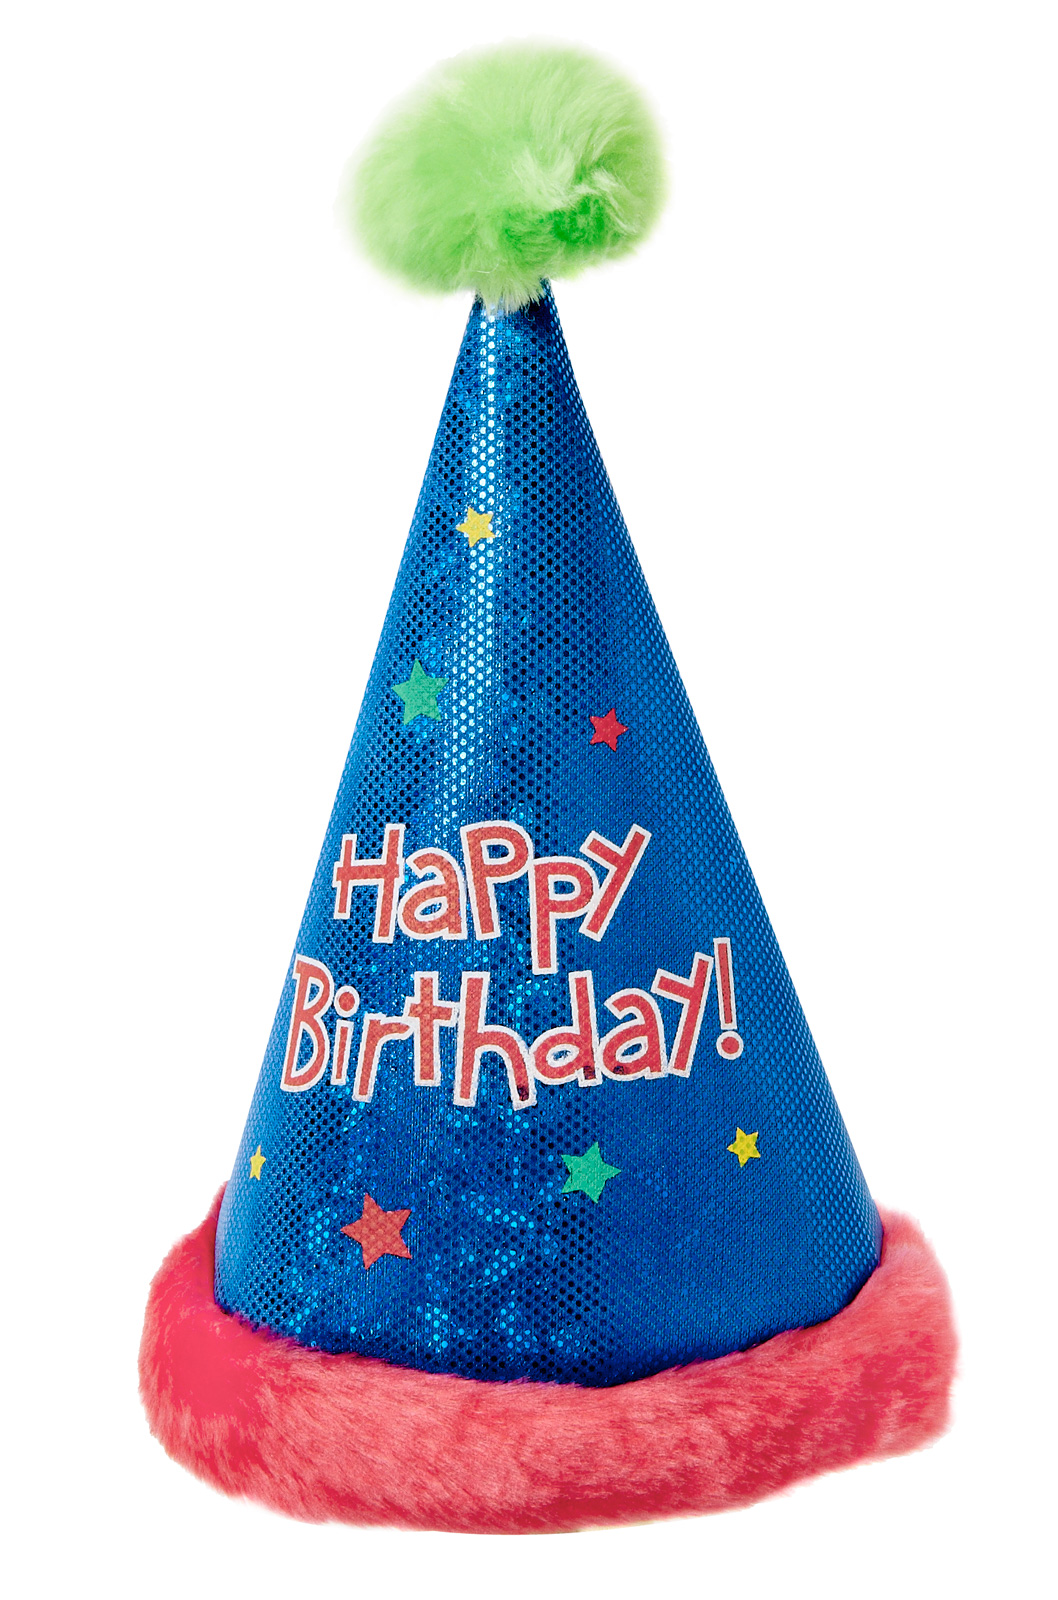 Sale A Birthday Hat In Stock